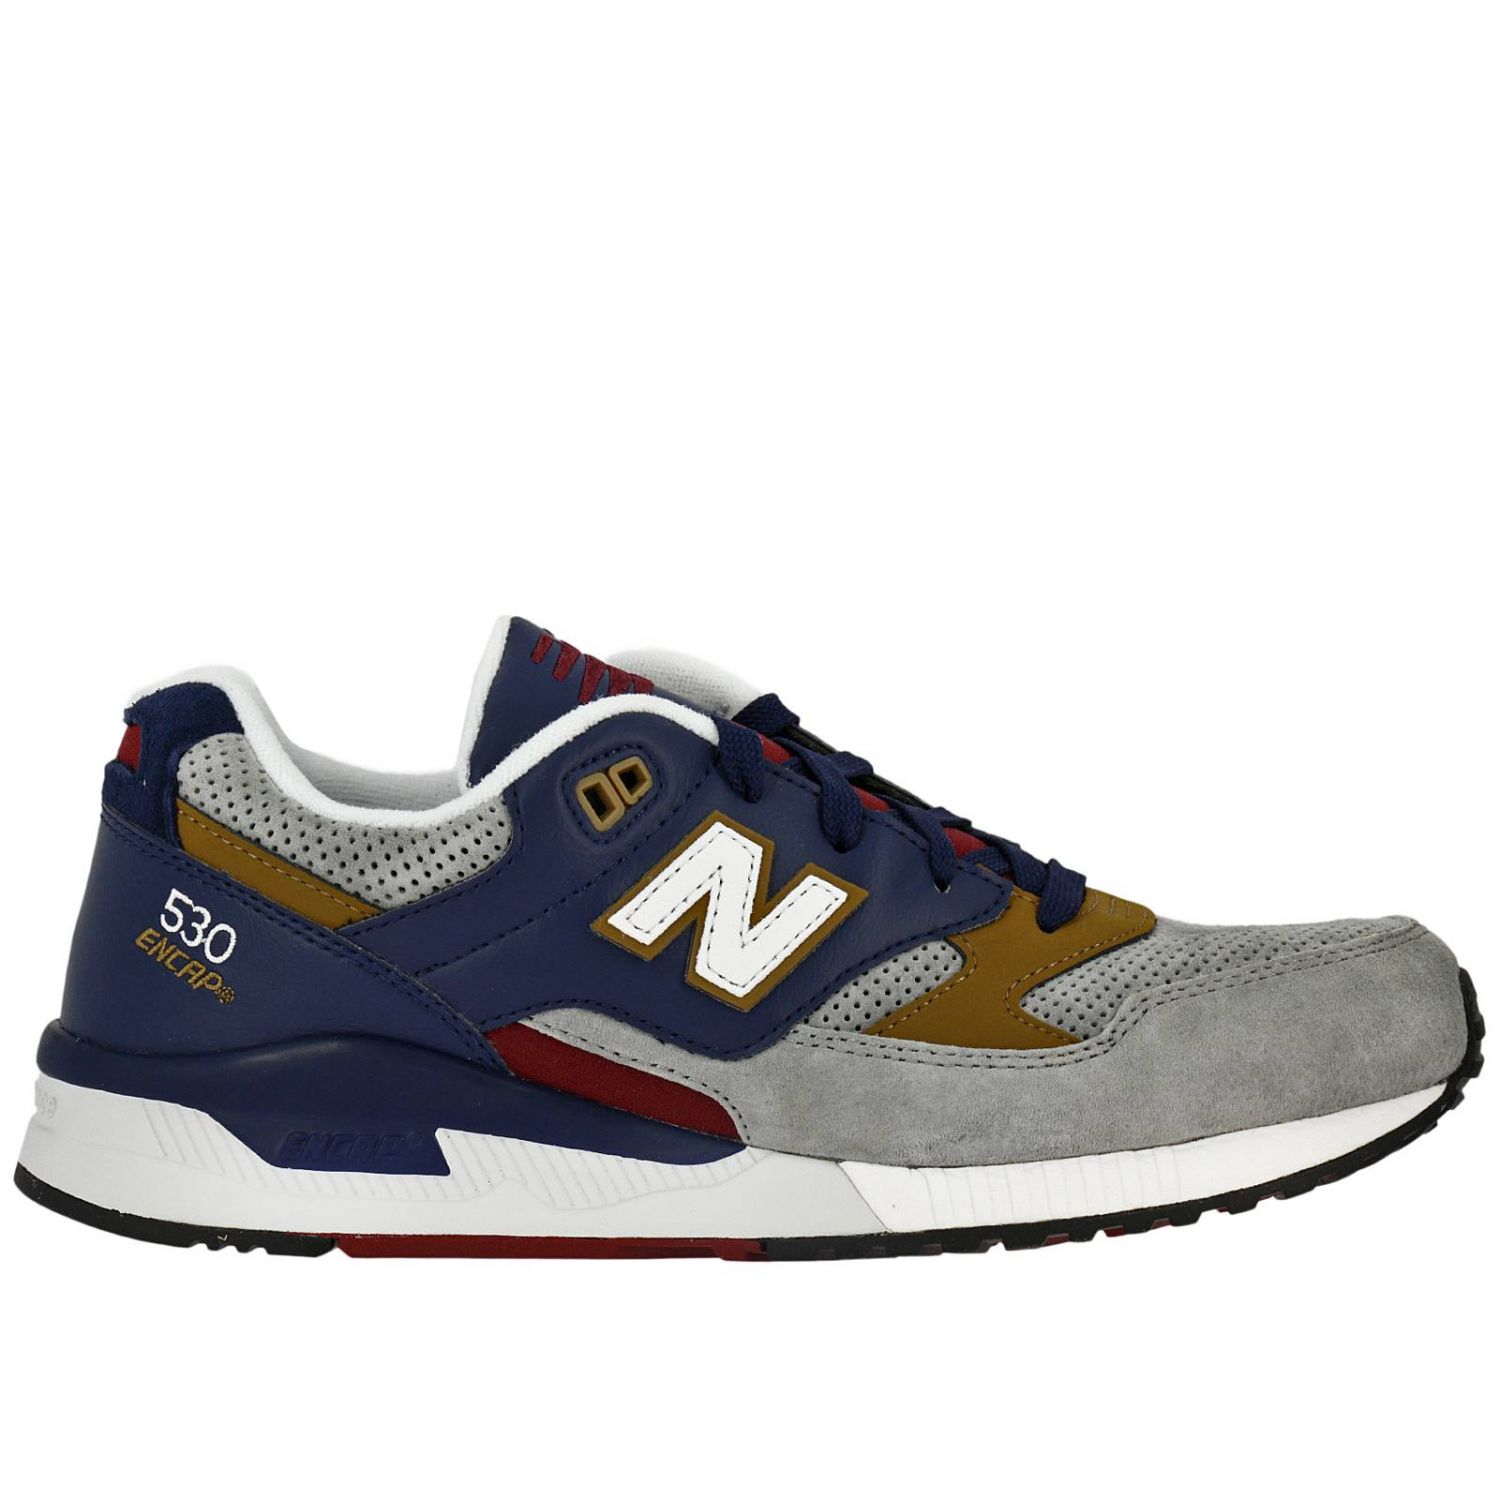 New Balance Outlet: Shoes men | Sneakers New Balance Men Grey